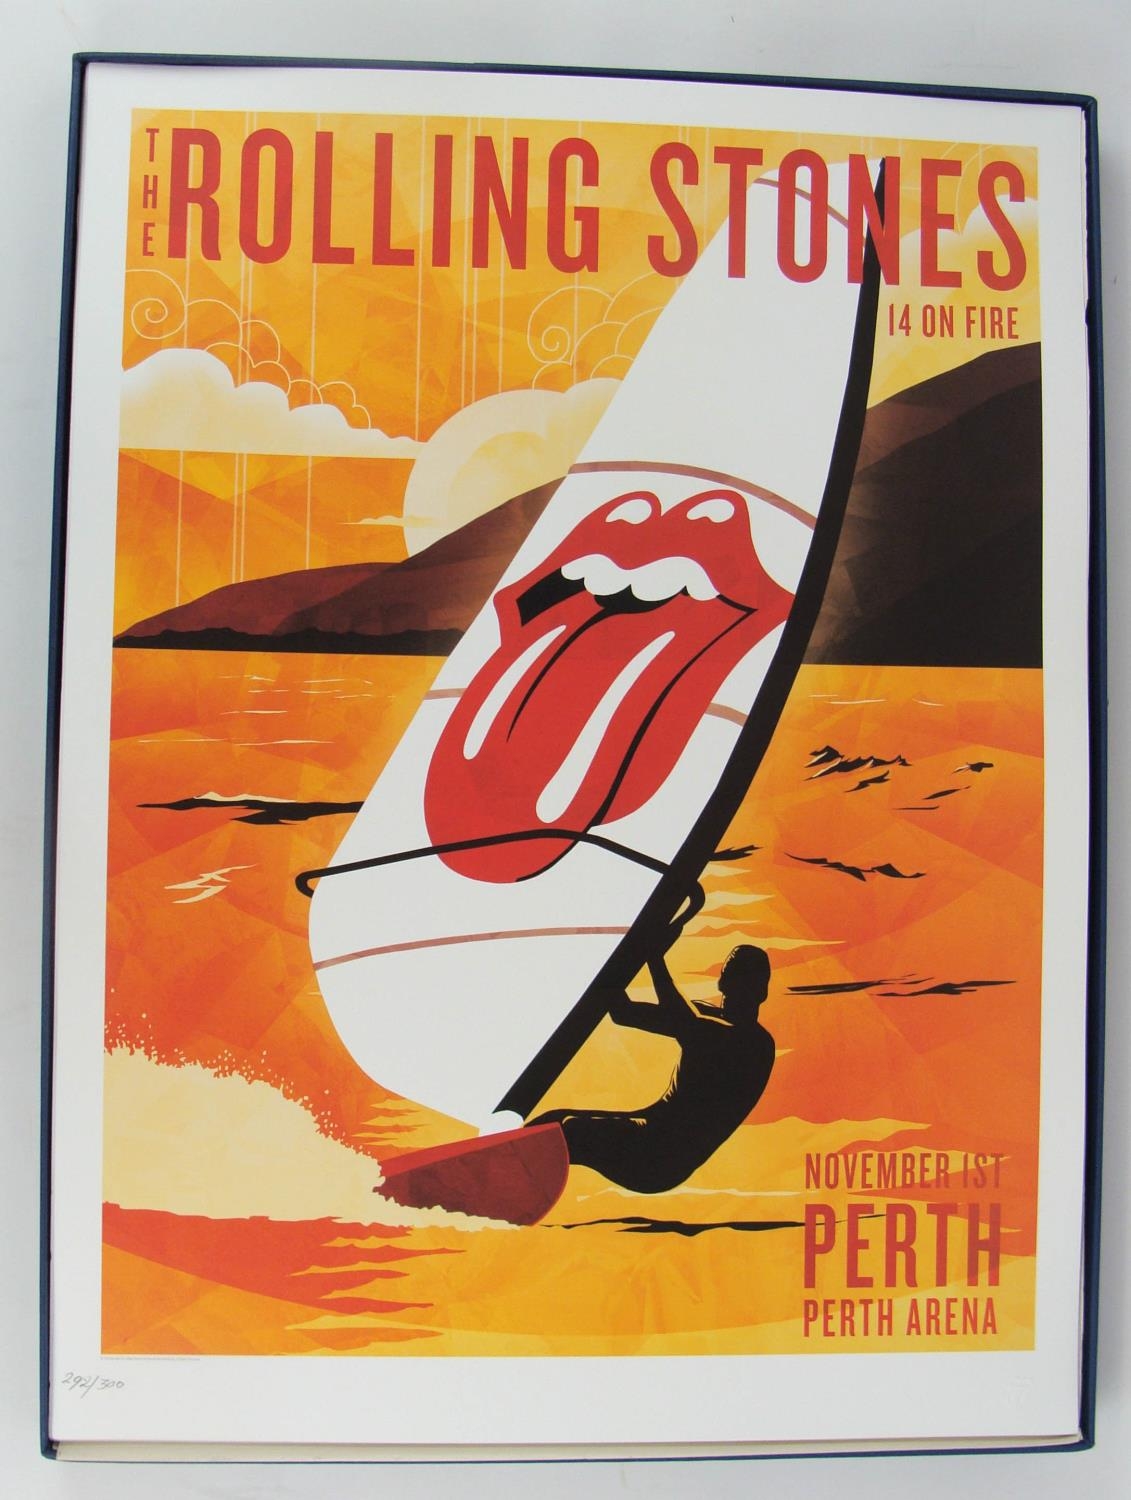 ROLLING STONES '14 on FIRE' BOX SET, of 13 lithographic posters from the 2014 Australia and New - Image 7 of 21